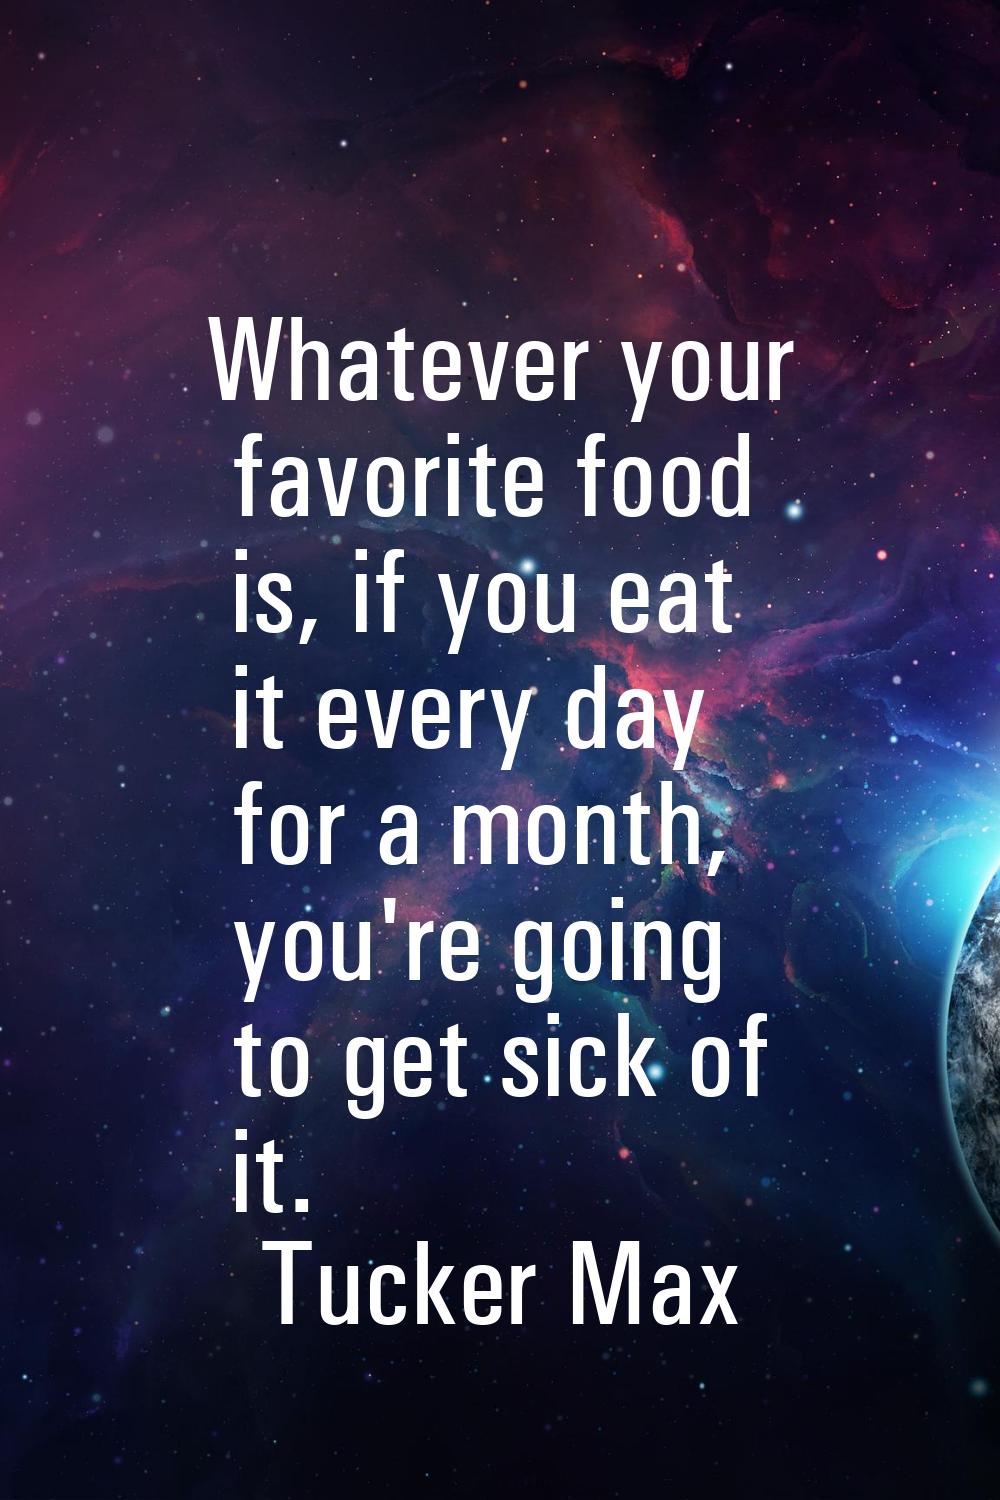 Whatever your favorite food is, if you eat it every day for a month, you're going to get sick of it